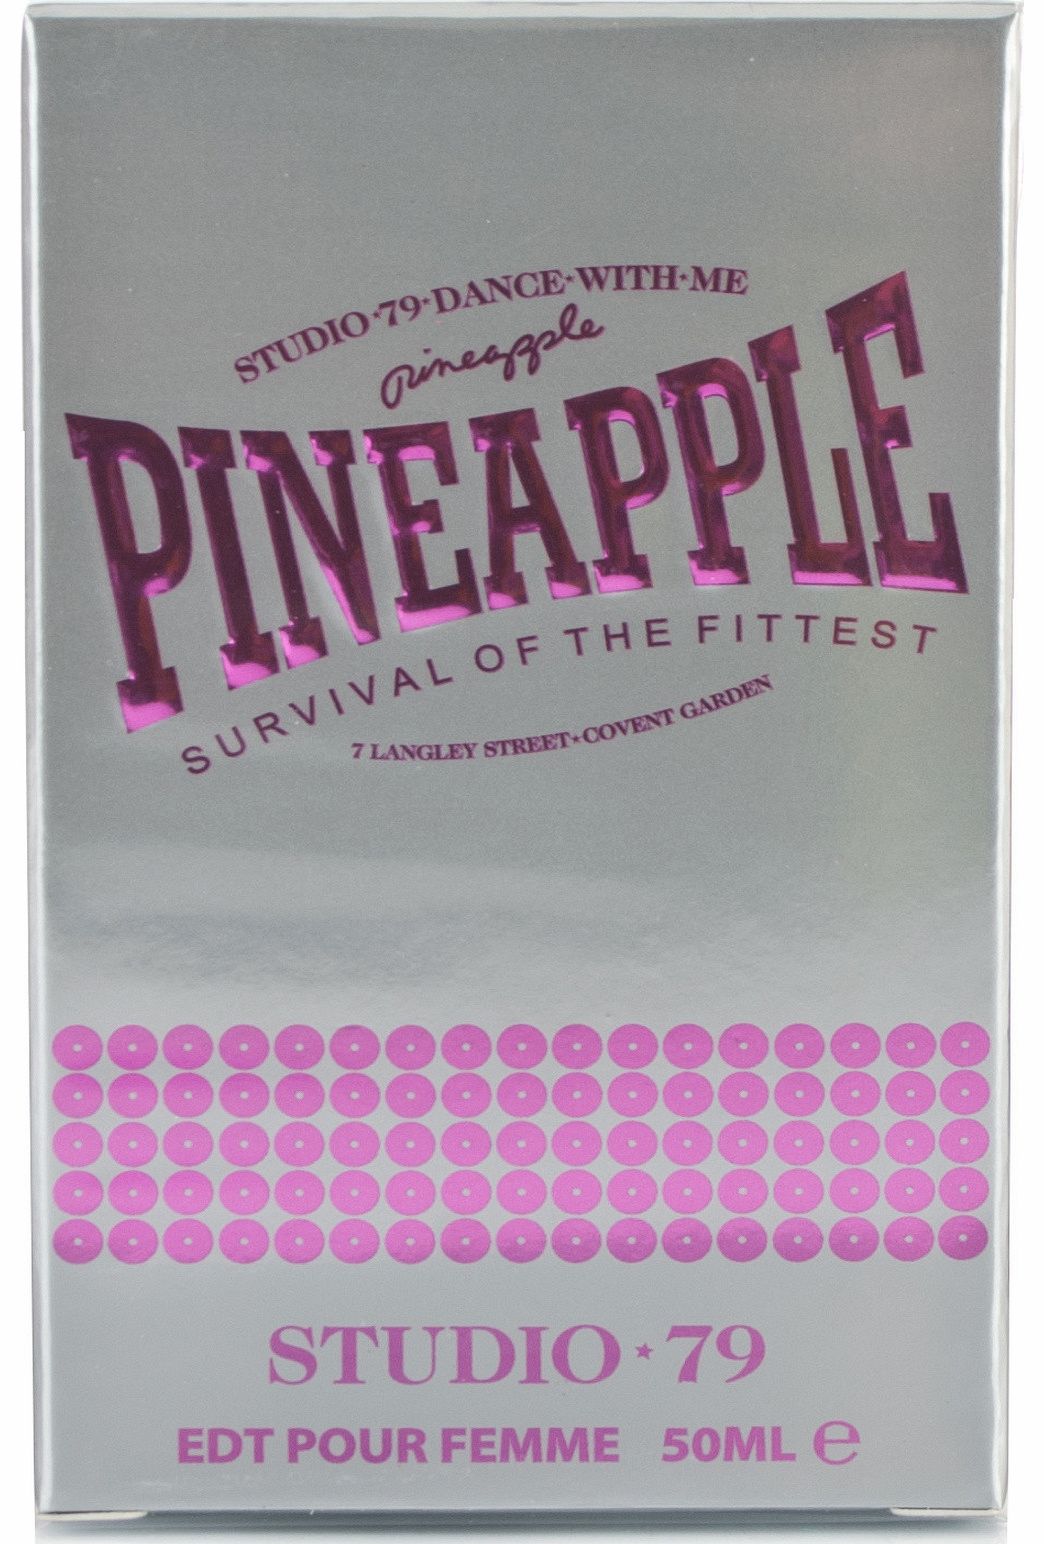 Pineapple Survival of the Fittest 50ml EDT Spray